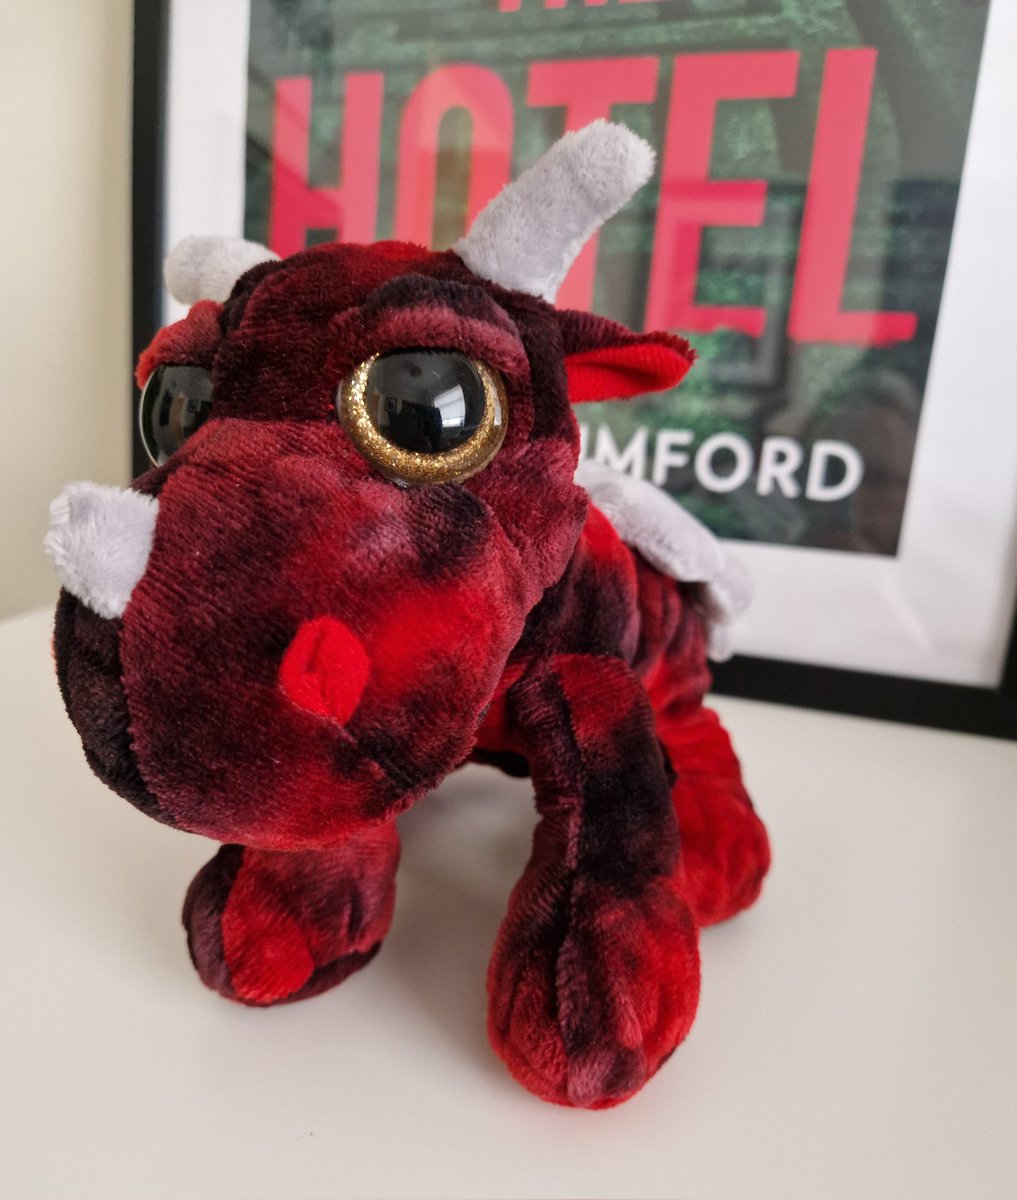 Happy St David's Day! Here's my pet dragon. He'd appreciate it if Wales got just one rain-free day this month as it's hard to be a fire-breathing terror in a downpour...